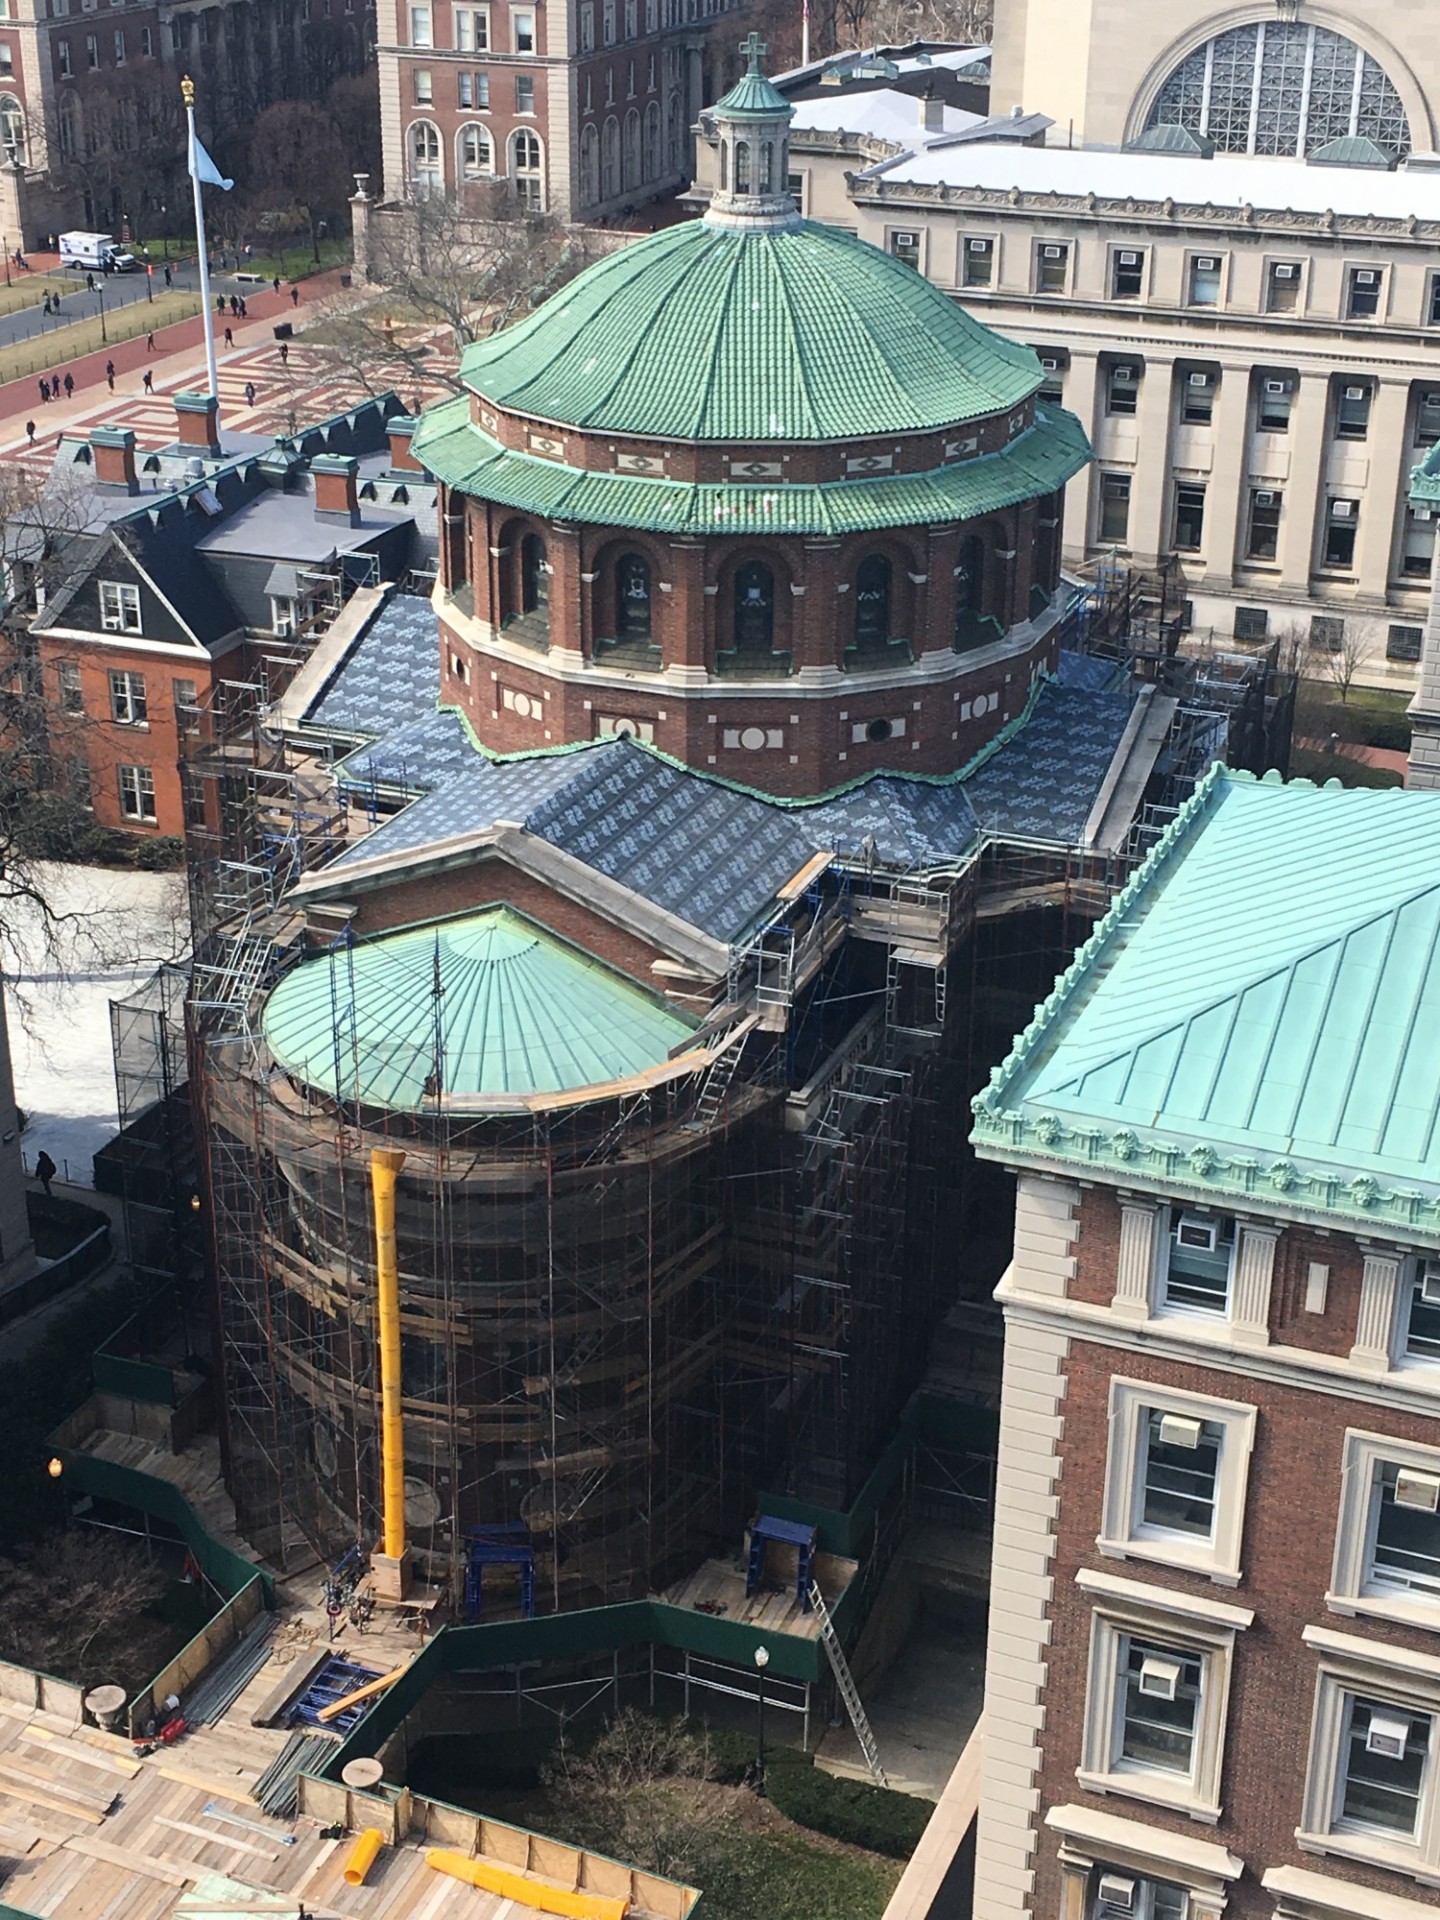 Tile removal from the sloped roof is complete, March 2018